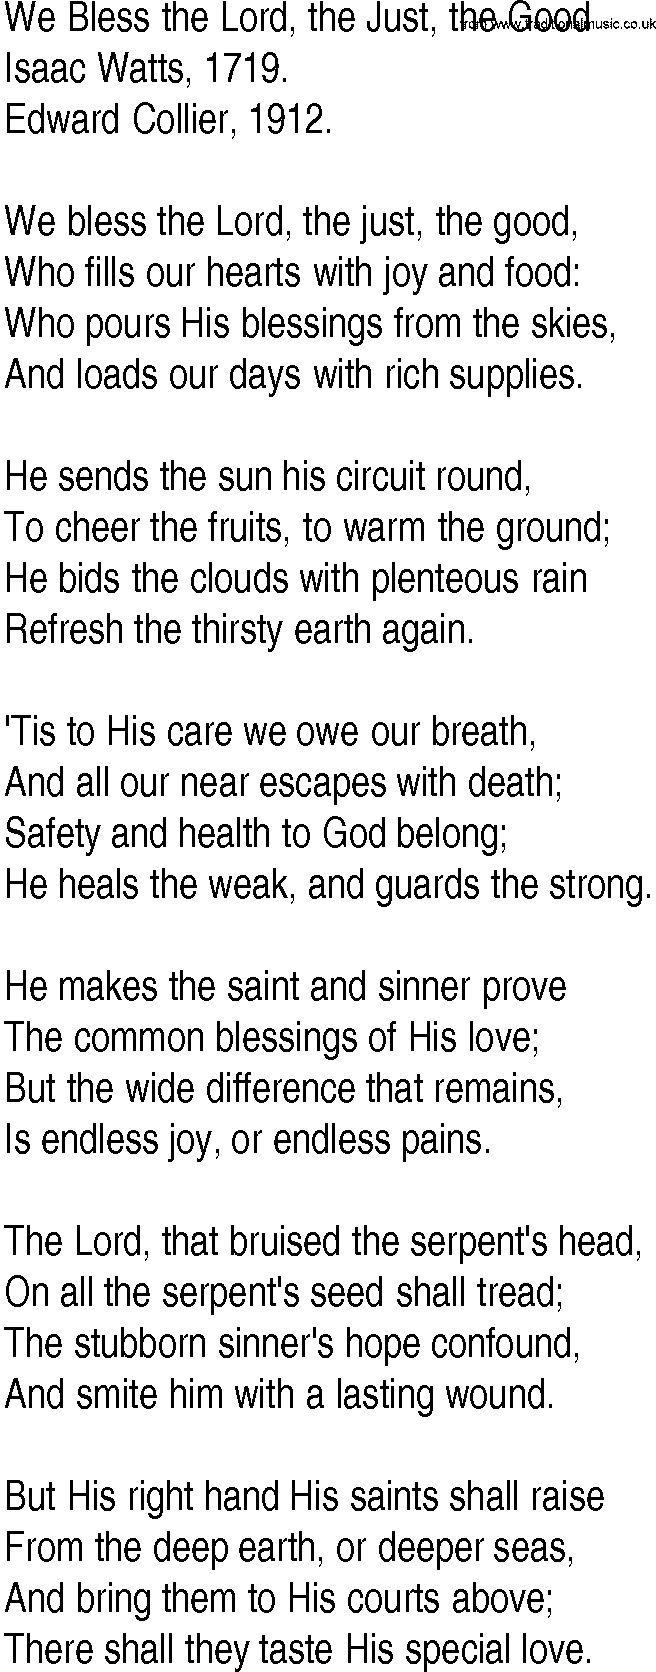 Hymn and Gospel Song: We Bless the Lord, the Just, the Good by Isaac Watts lyrics